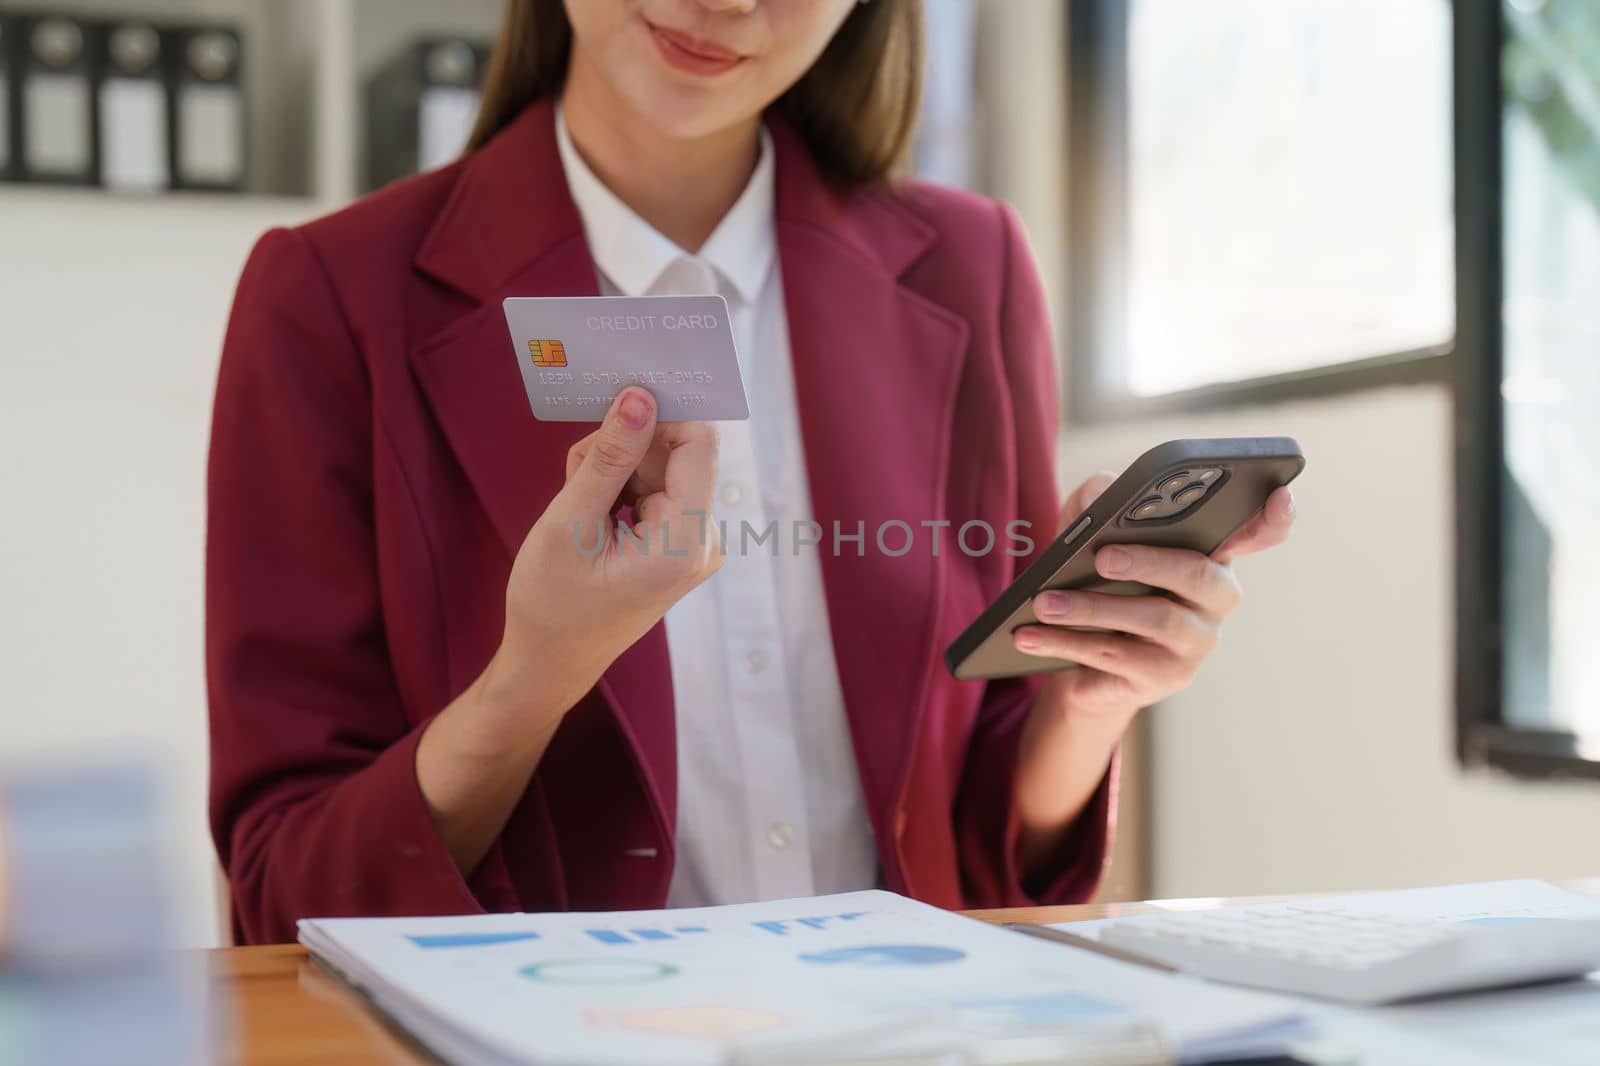 Asian woman using smartphone and credit card for online shopping. E-payment technology, shopaholic lifestyle, mobile phone financial application concep by itchaznong